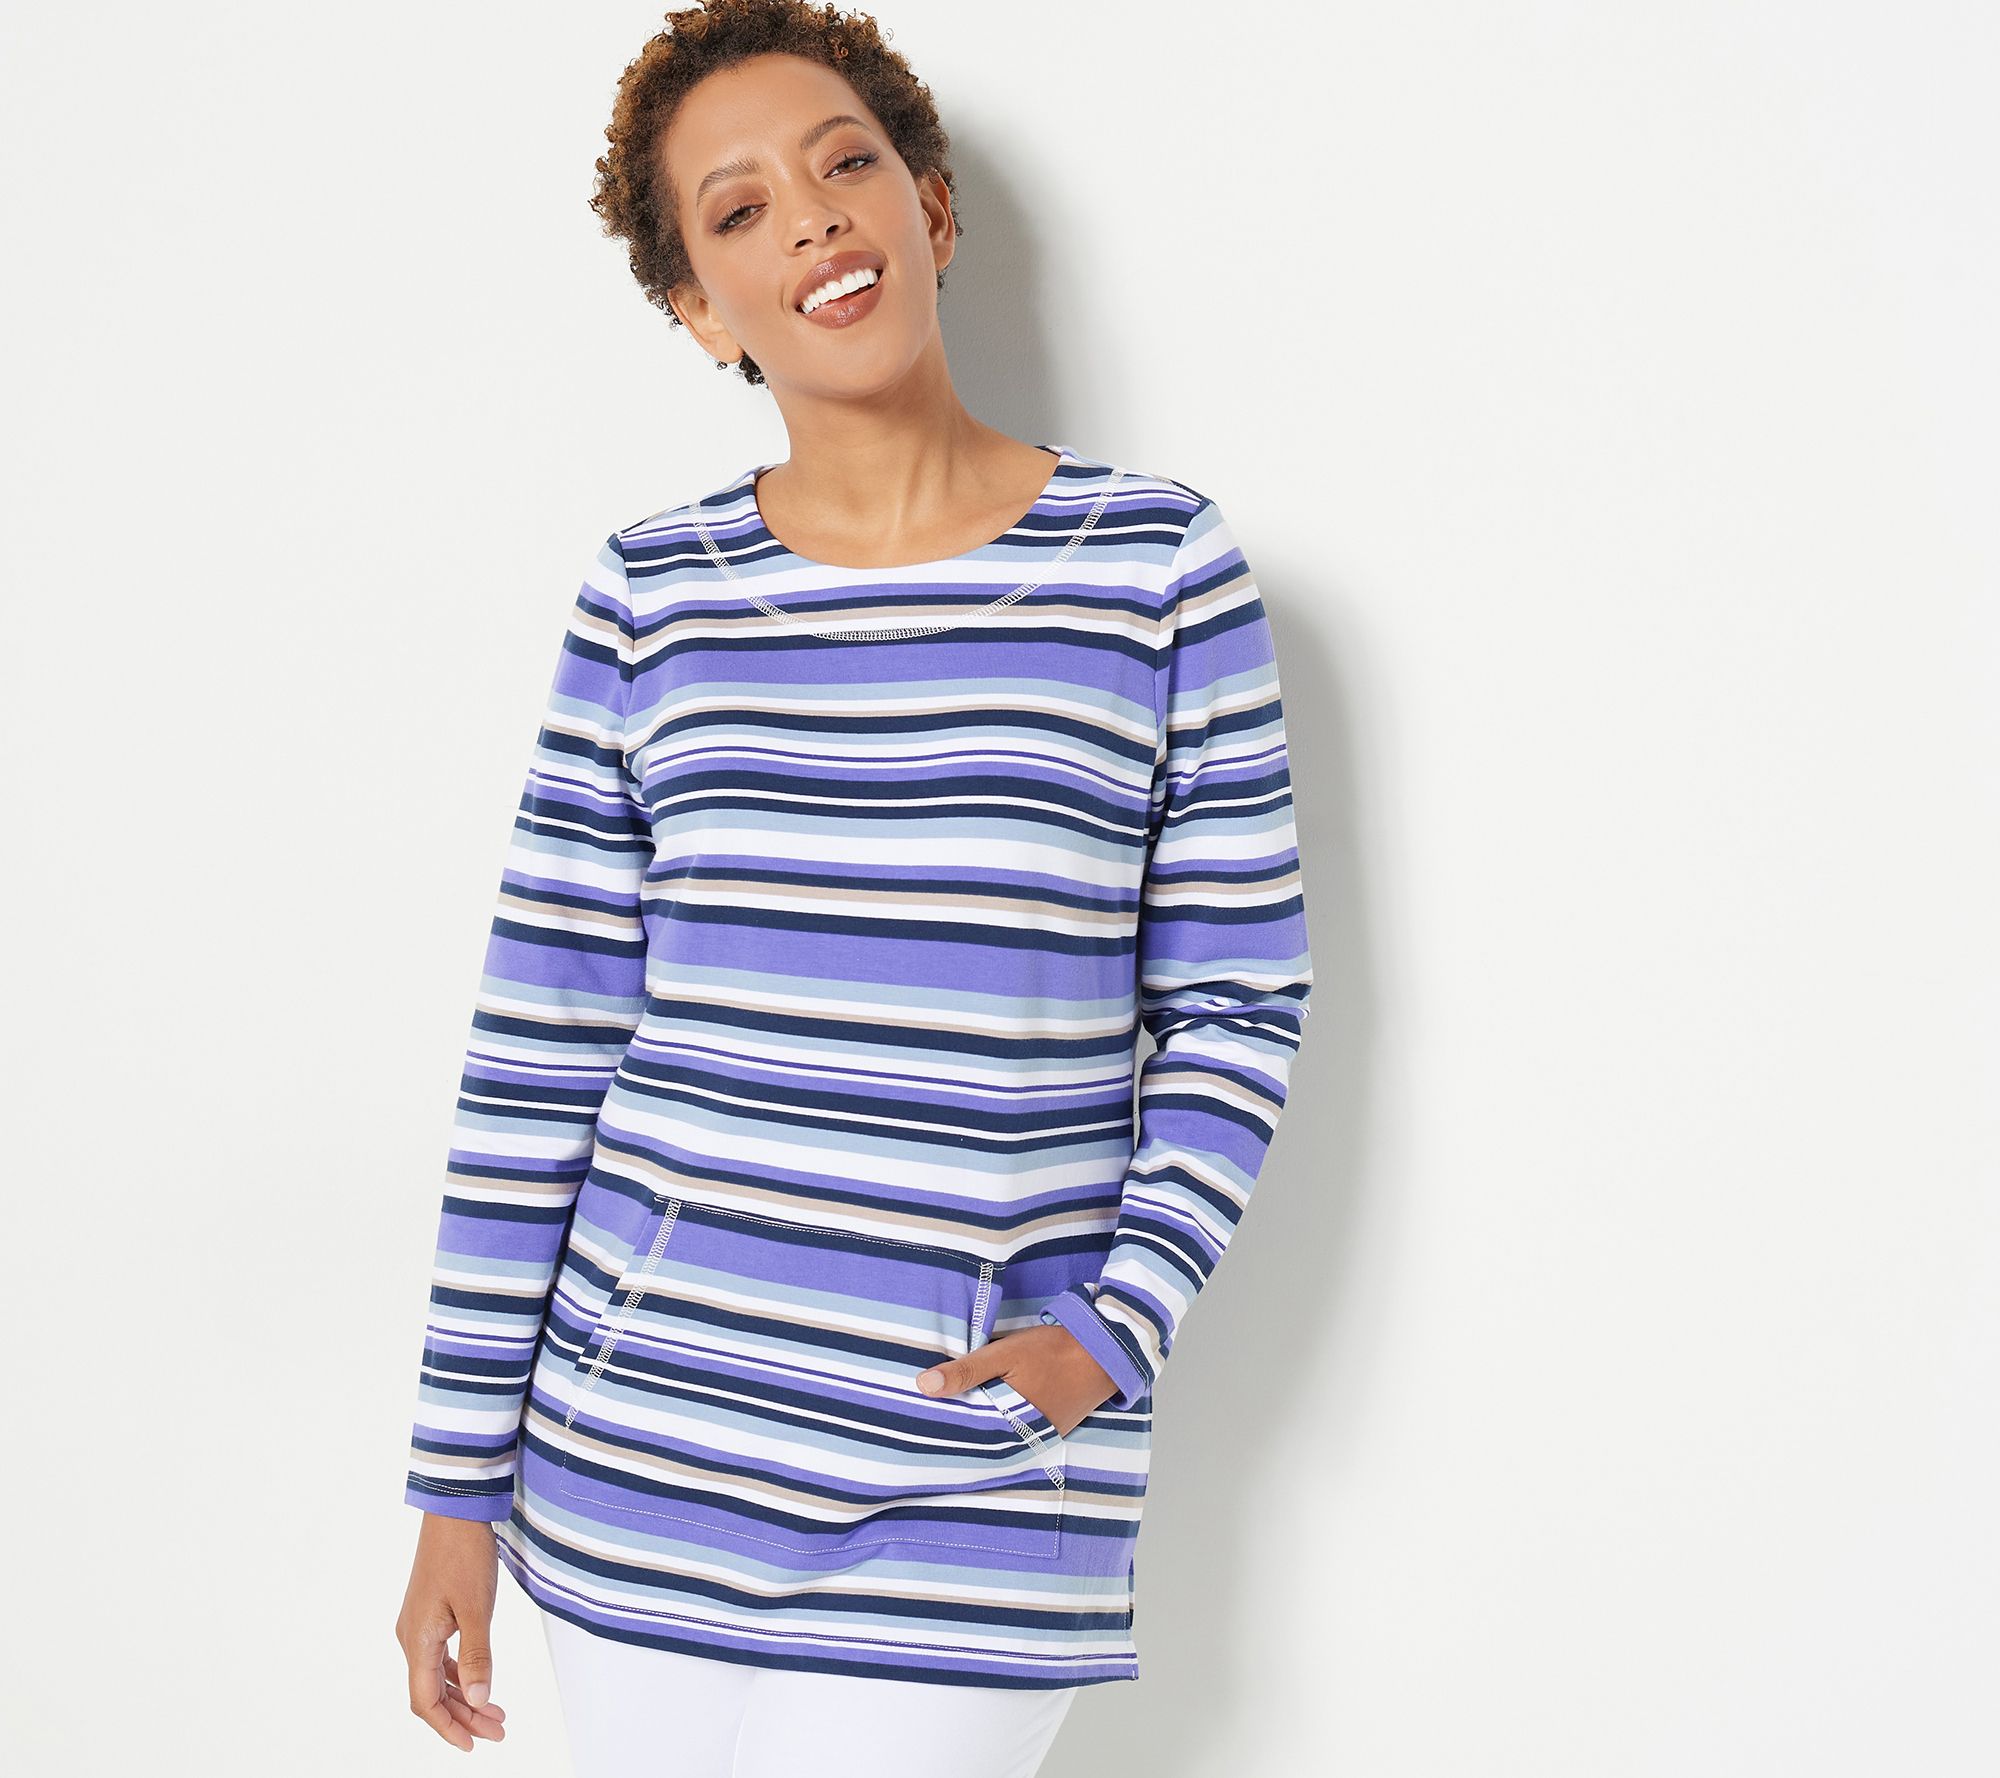 Sport Savvy French Terry Striped Top With Front Pocket - QVC.com